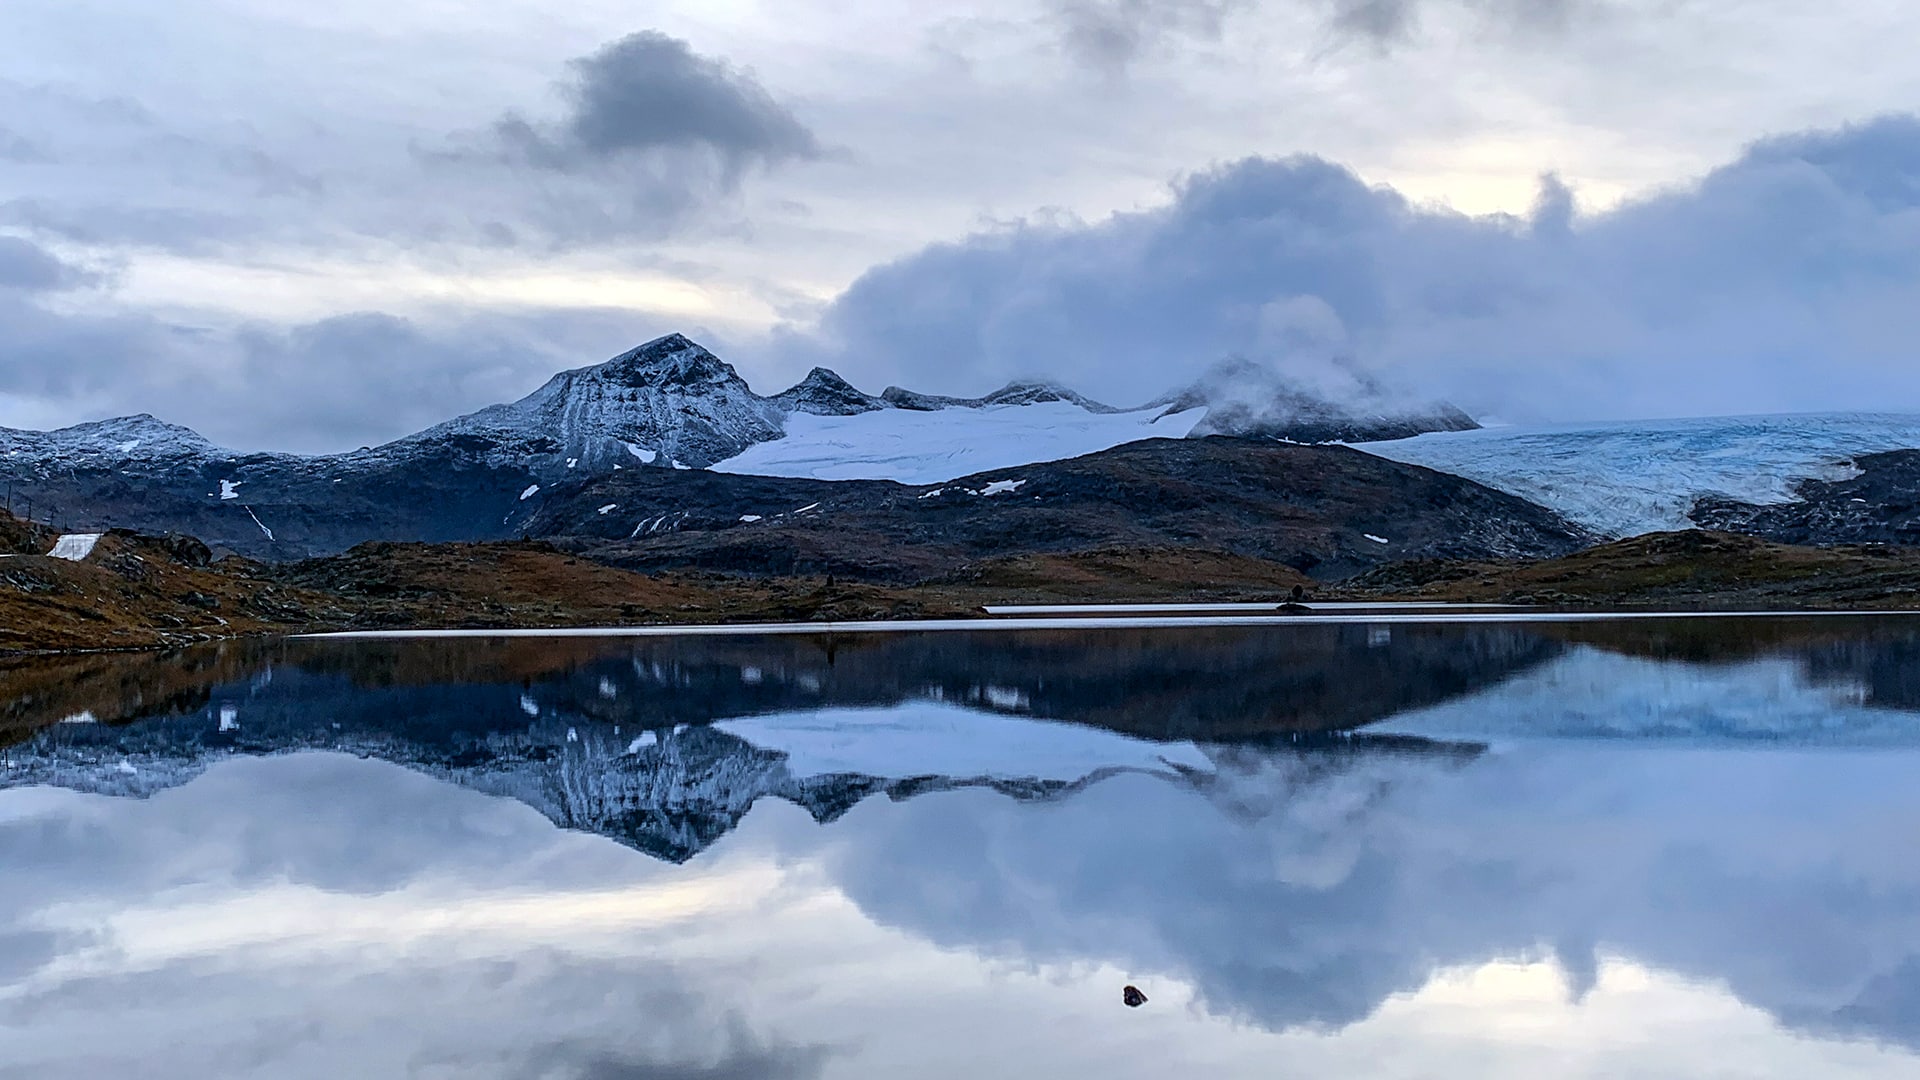 The mountains of Sognefjellet covered in snow and clouds is reflecting in a lake.